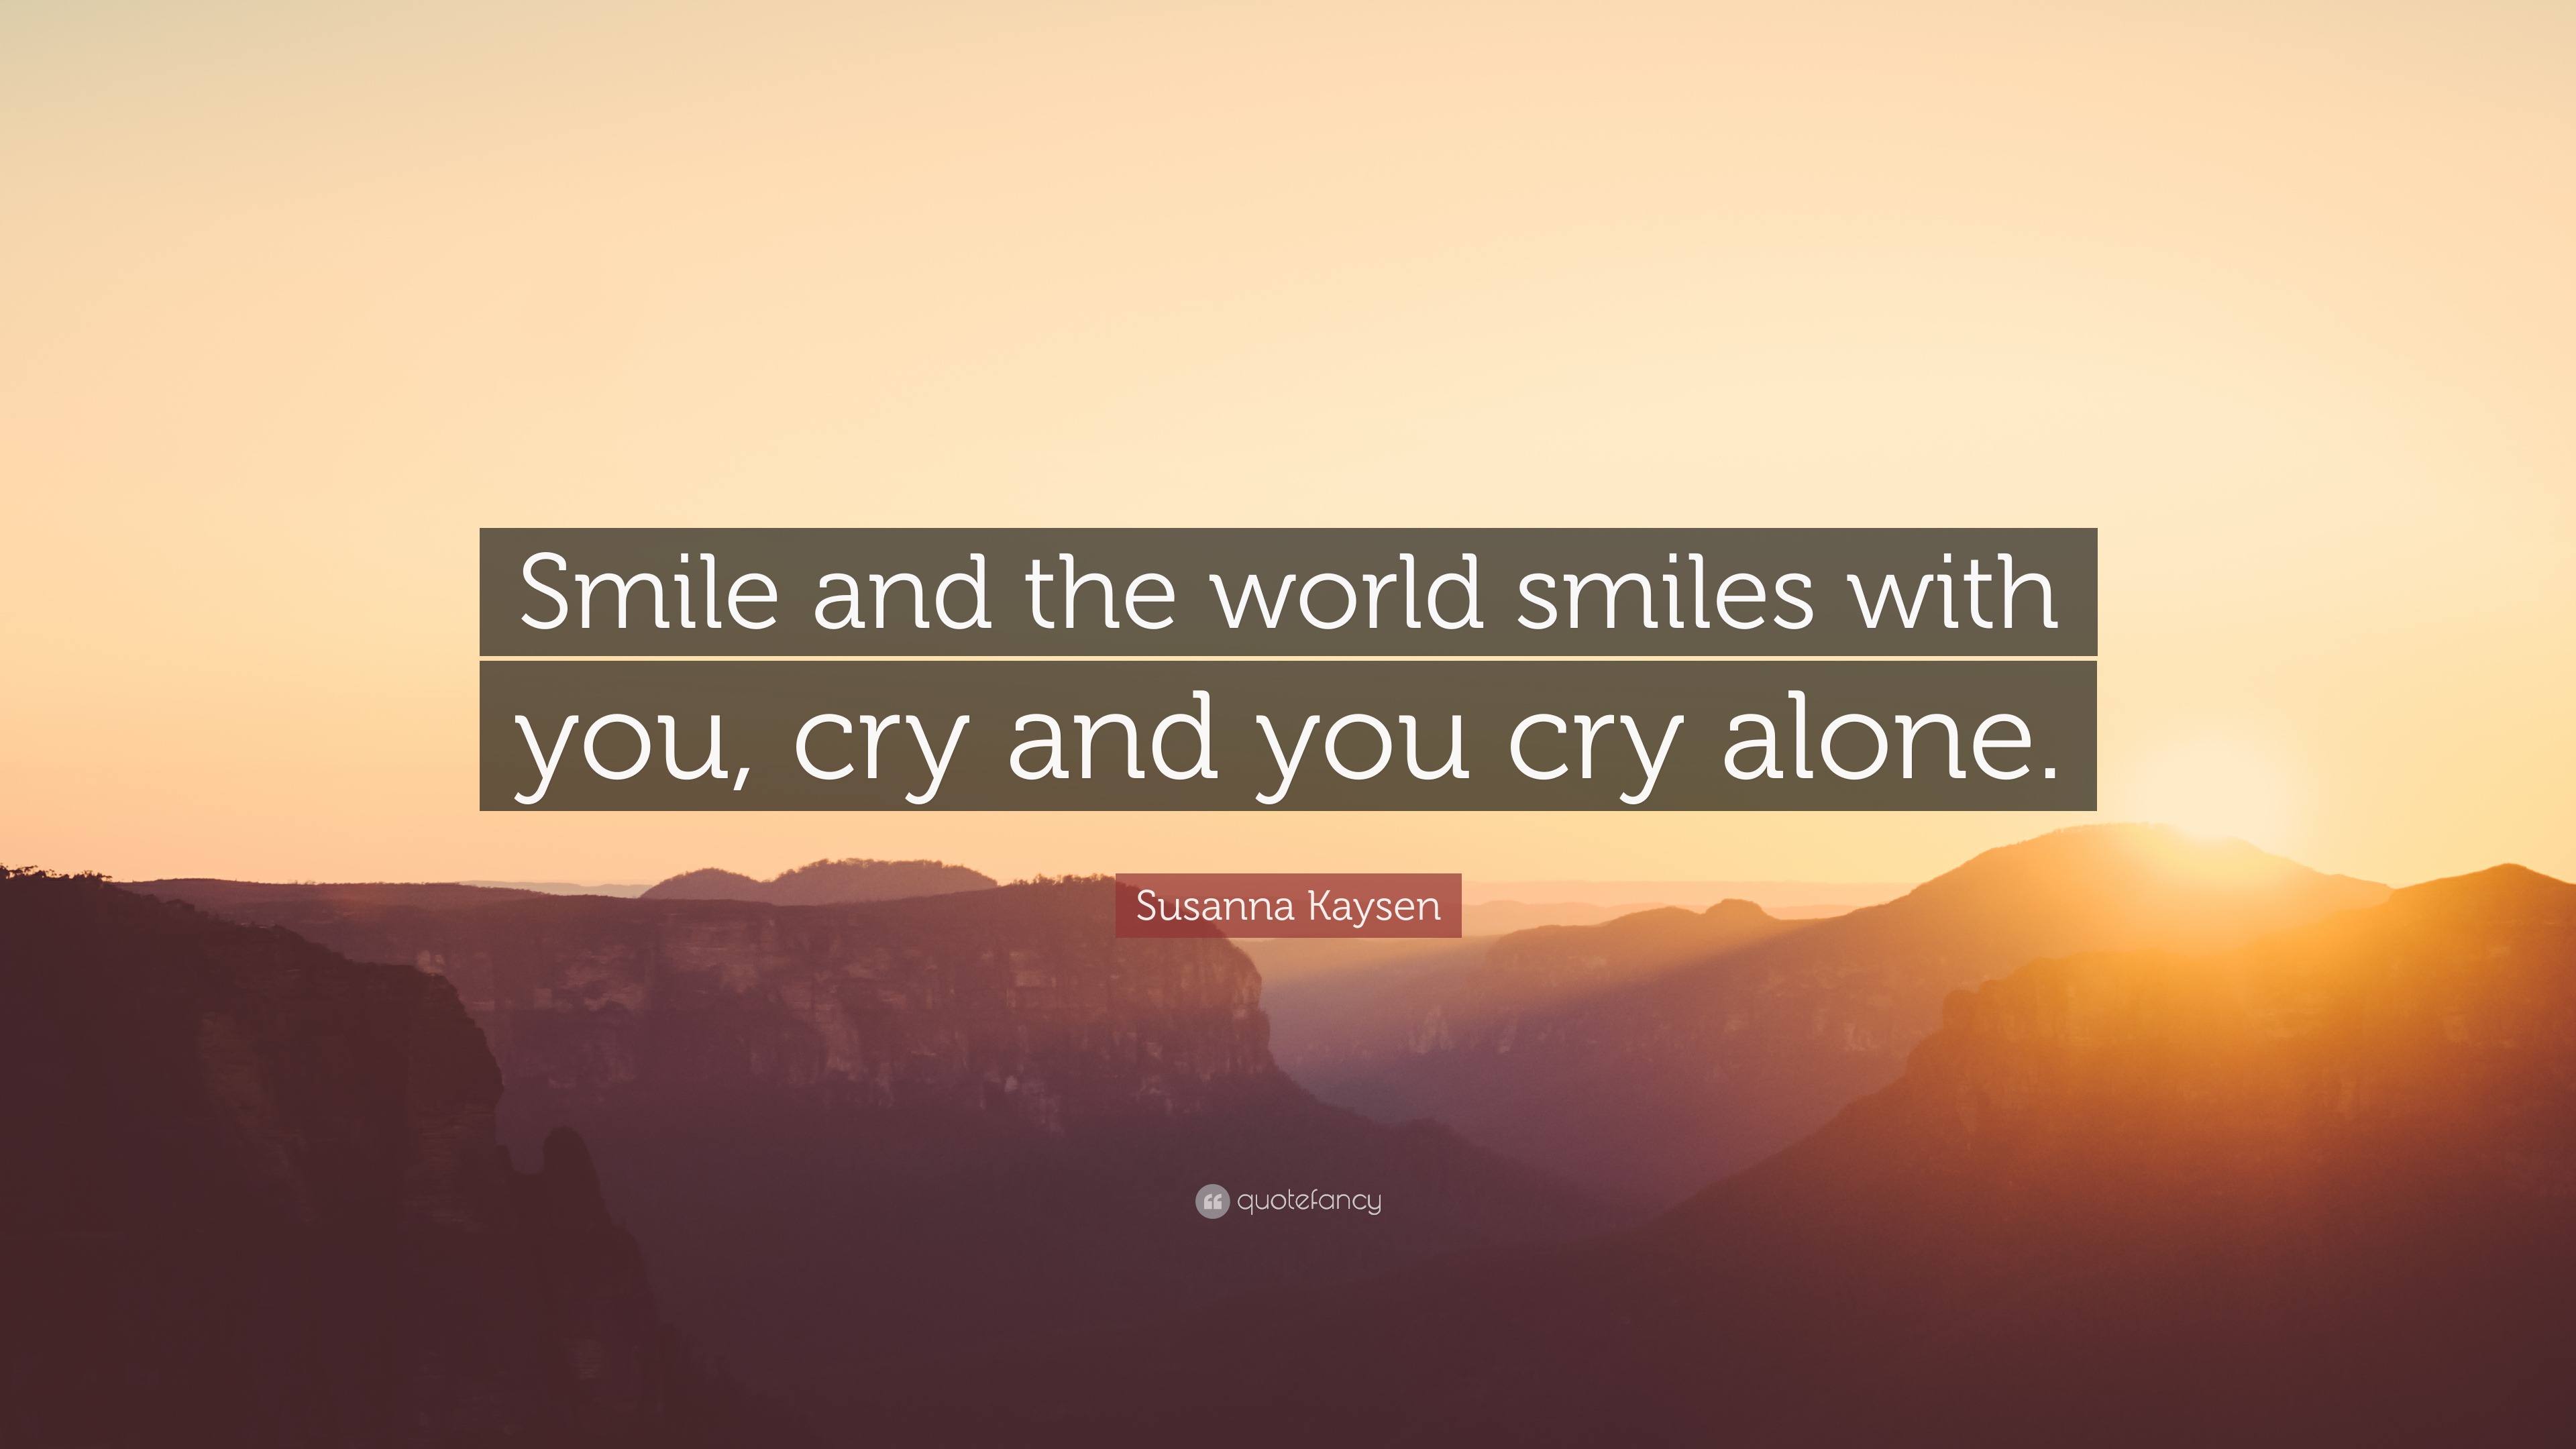 Susanna Kaysen Quote Smile And The World Smiles With You Cry And You Cry Alone